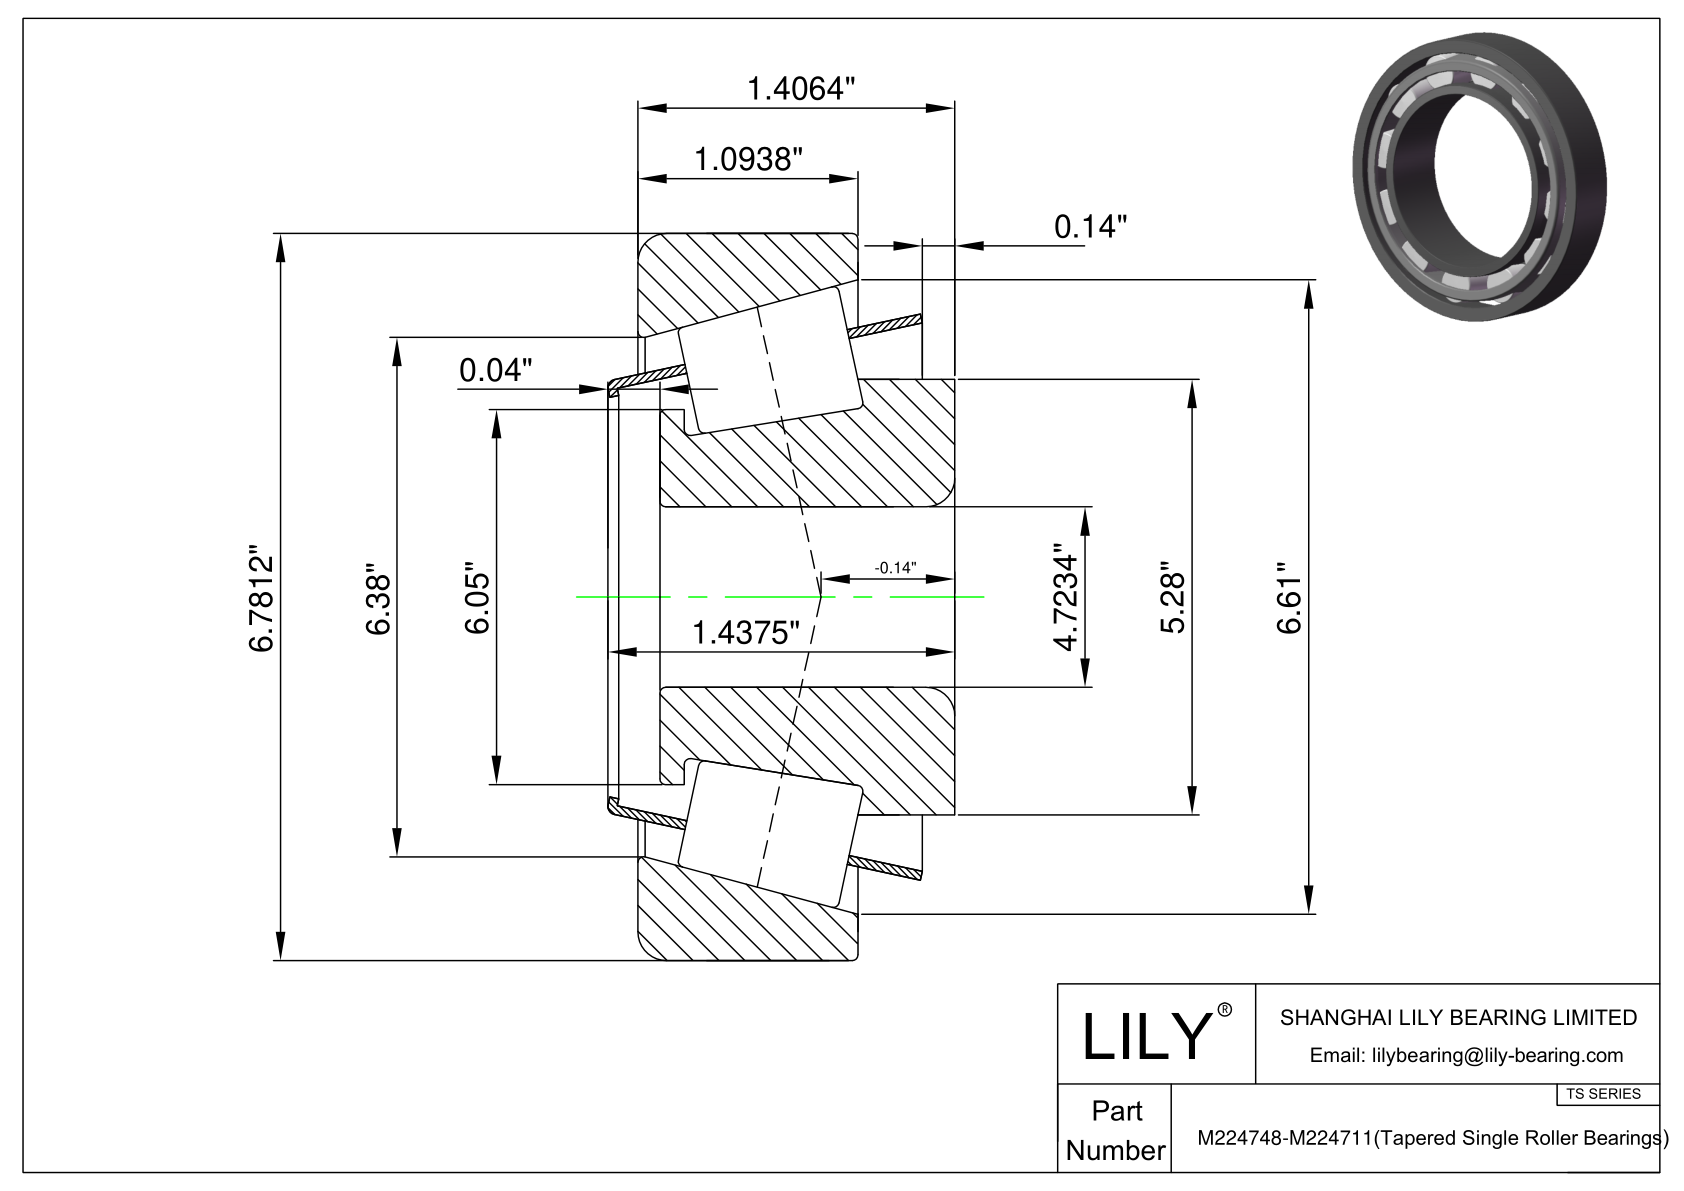 M224748-M224711 TS (Tapered Single Roller Bearings) (Imperial) cad drawing